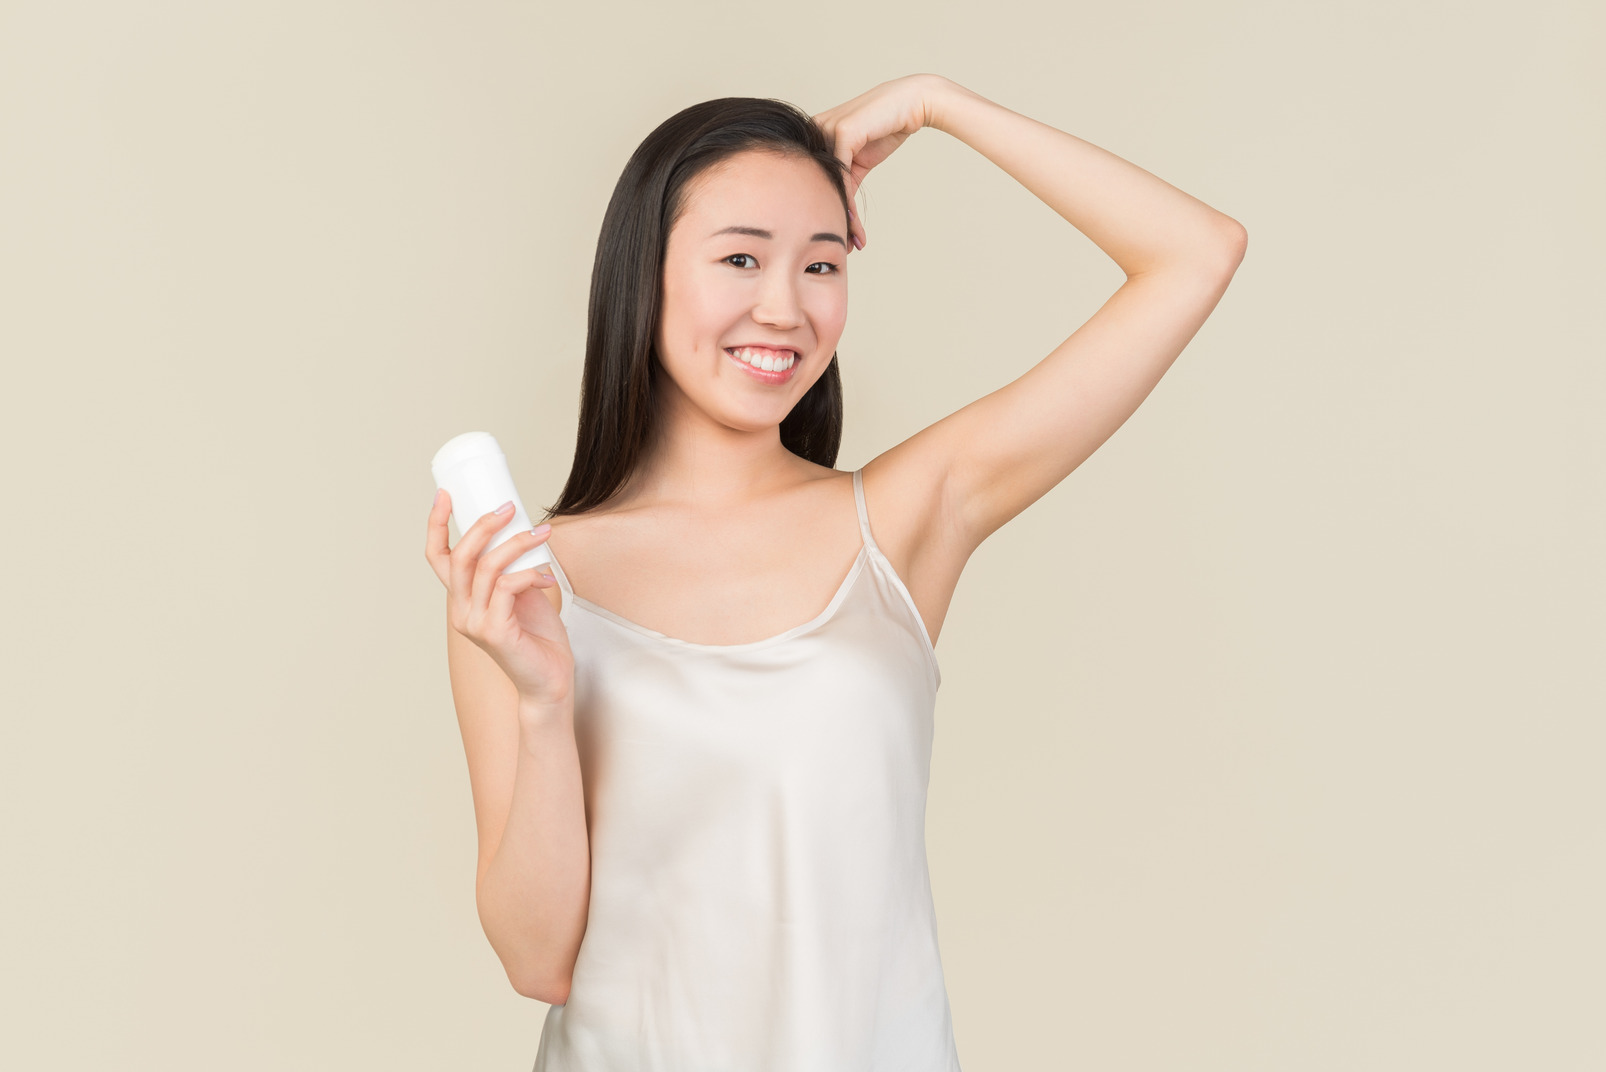 Taking proper care of underarms skin